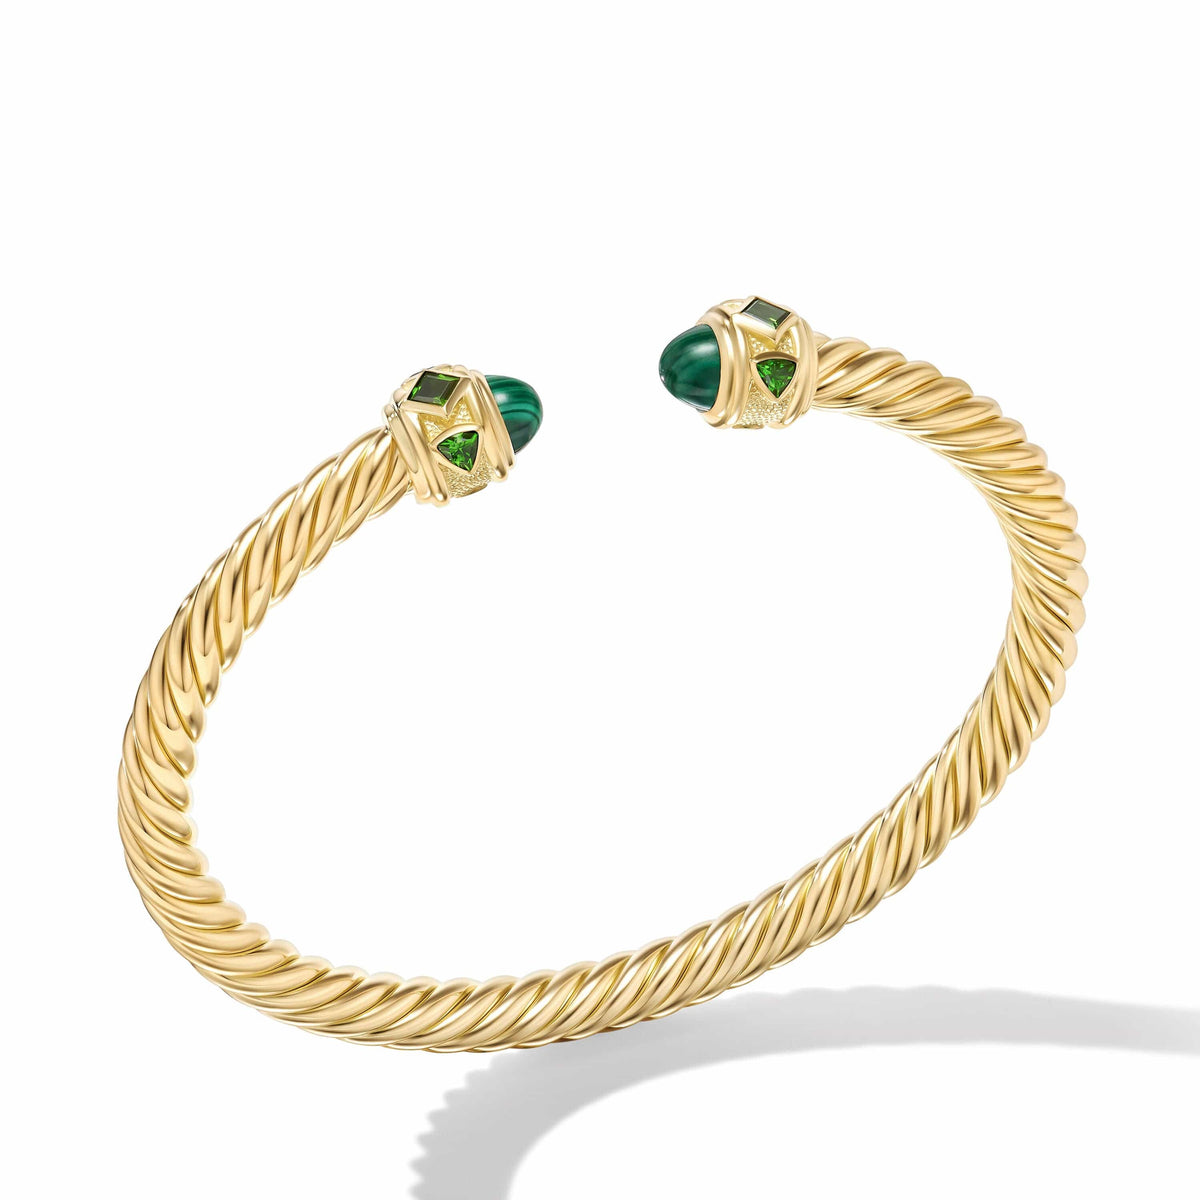 Renaissance® Bracelet in 18K Yellow Gold with Malachite and Chrome Diopside